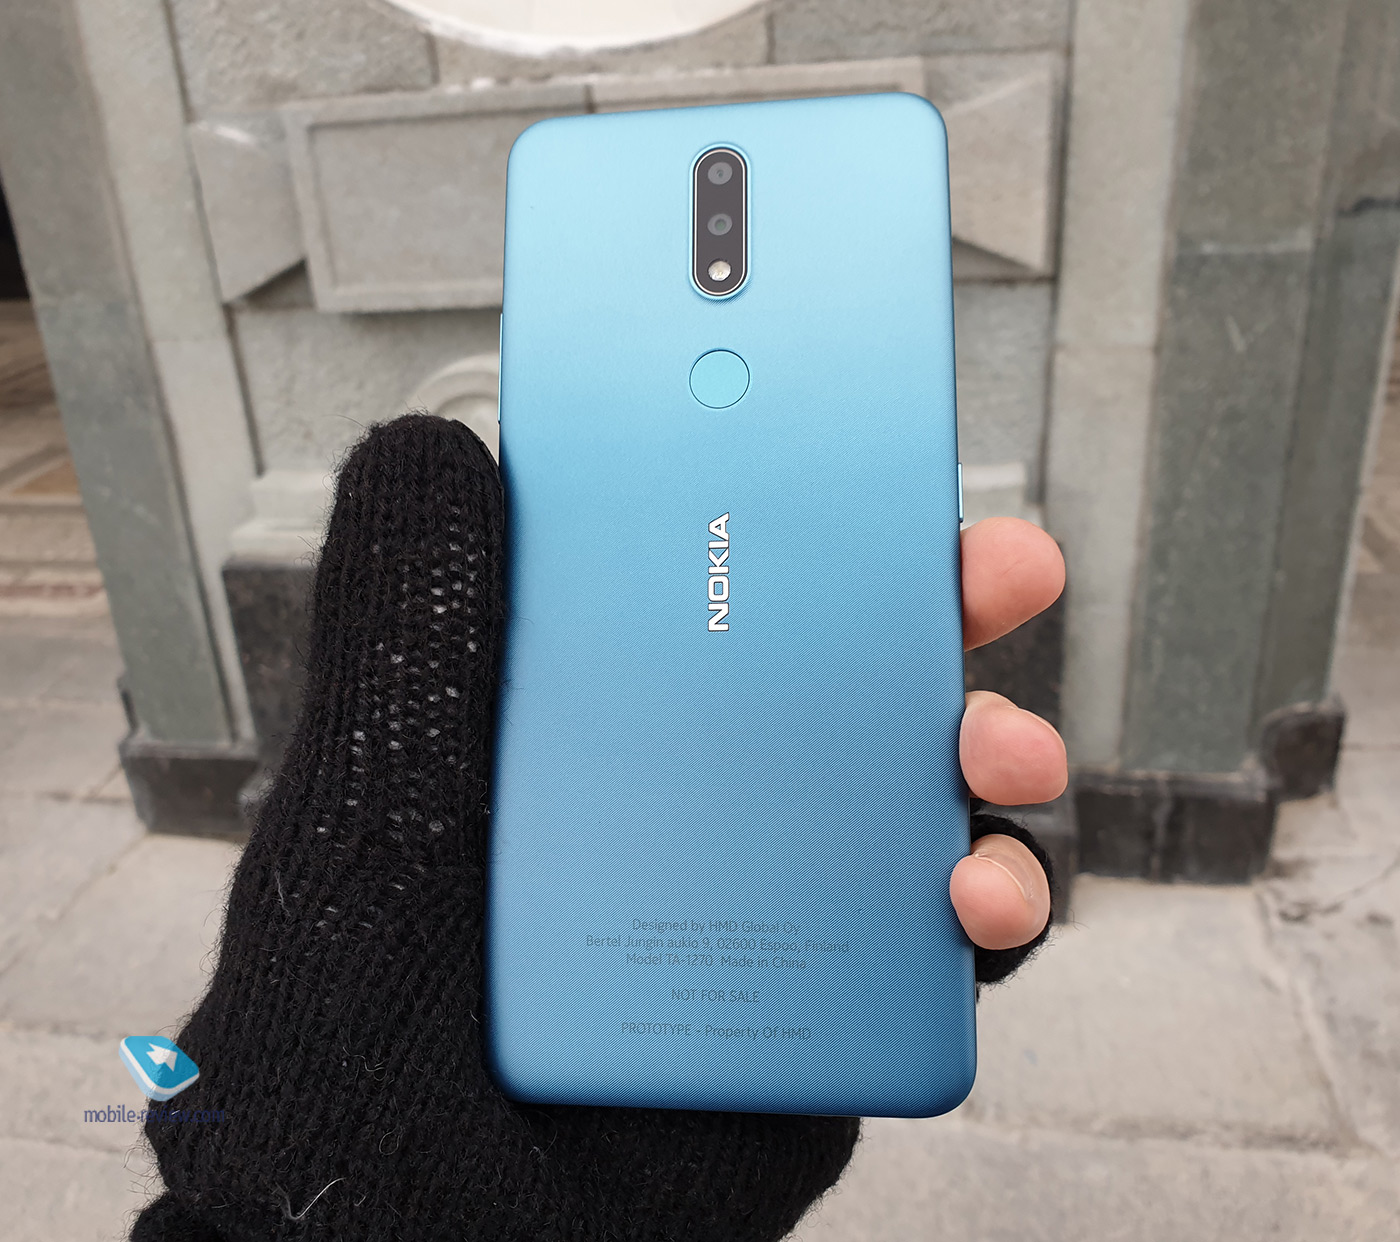 Nokia 2.4 review: an affordable smartphone for 9 rubles